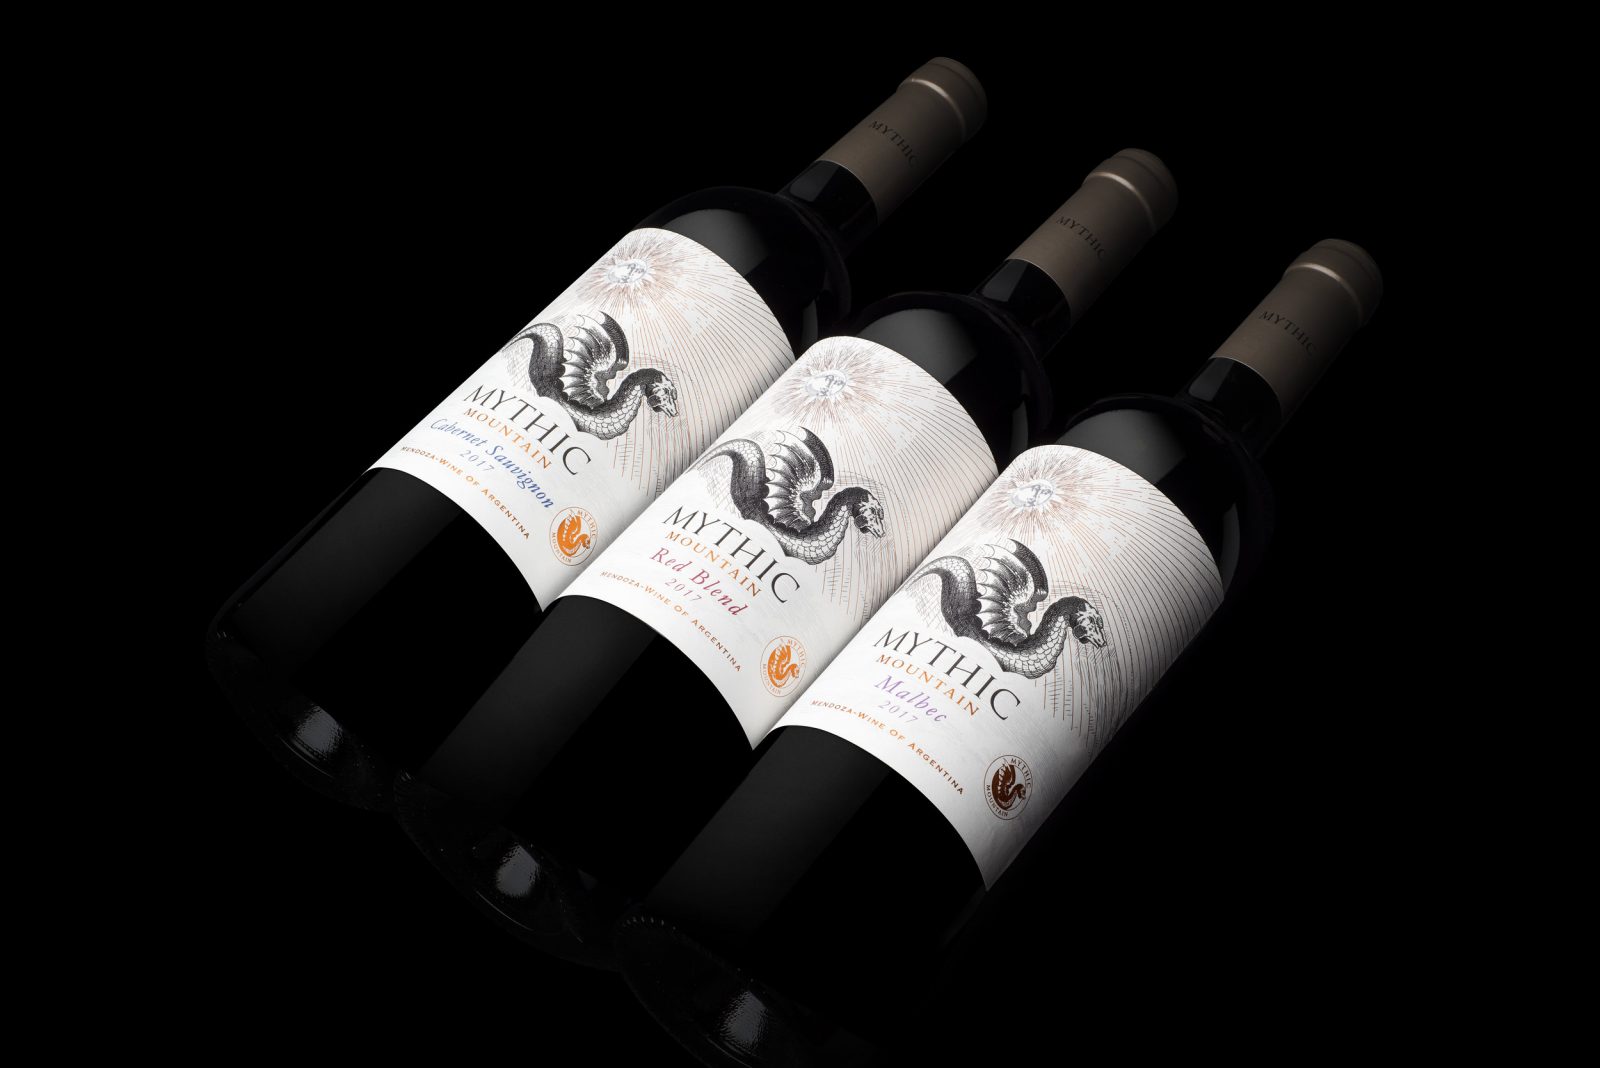 Packaging Design for Mythic Mountain Wine